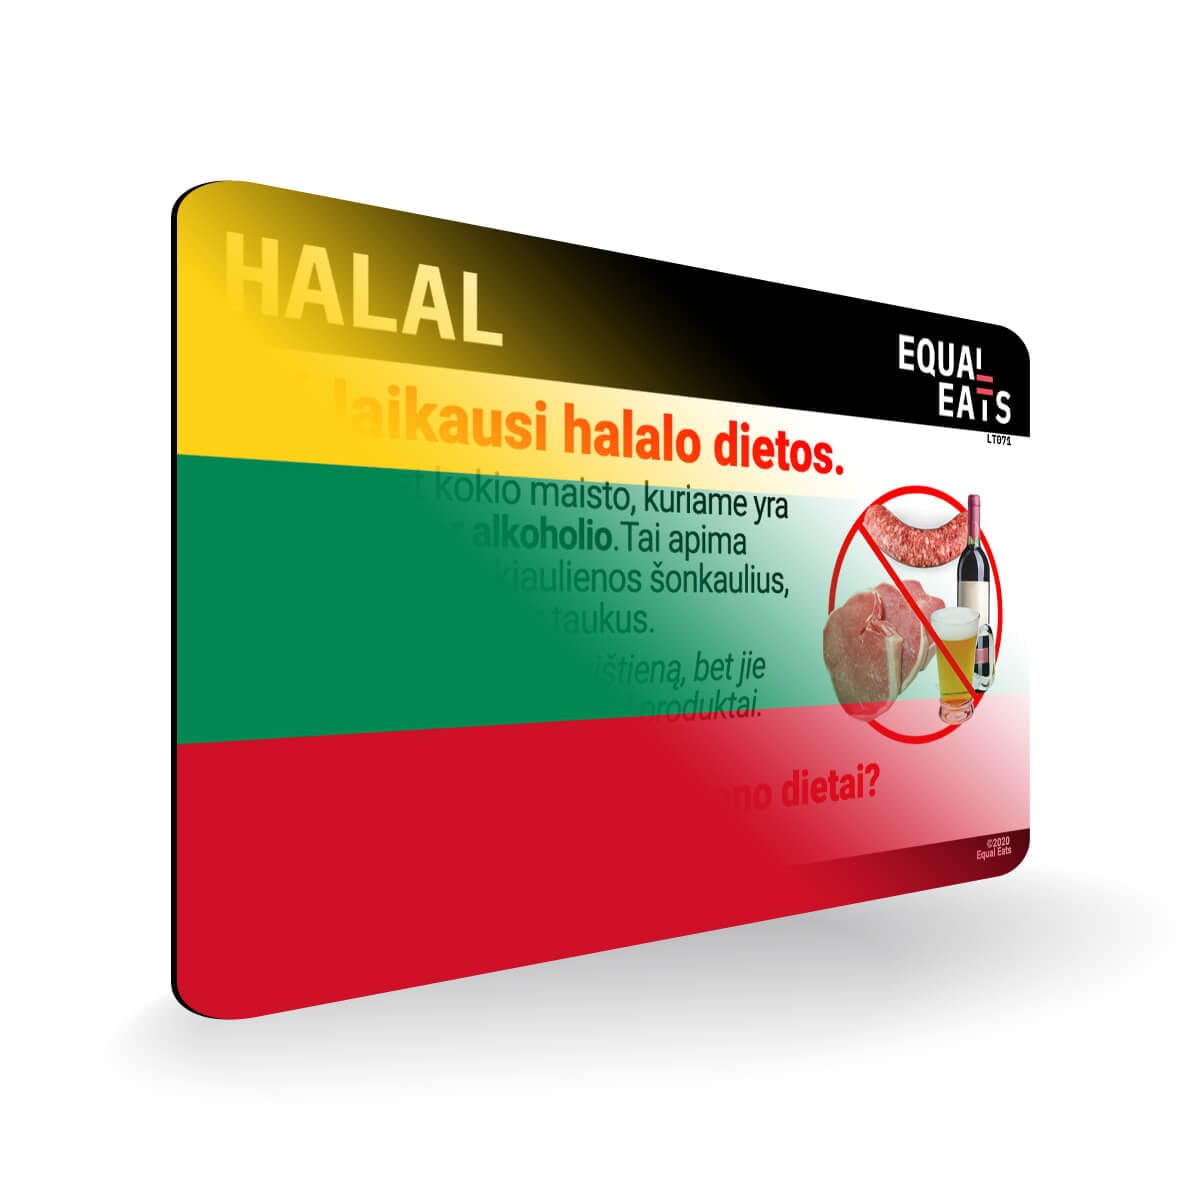 Halal Diet in Lithuanian. Halal Food Card for Lithuania